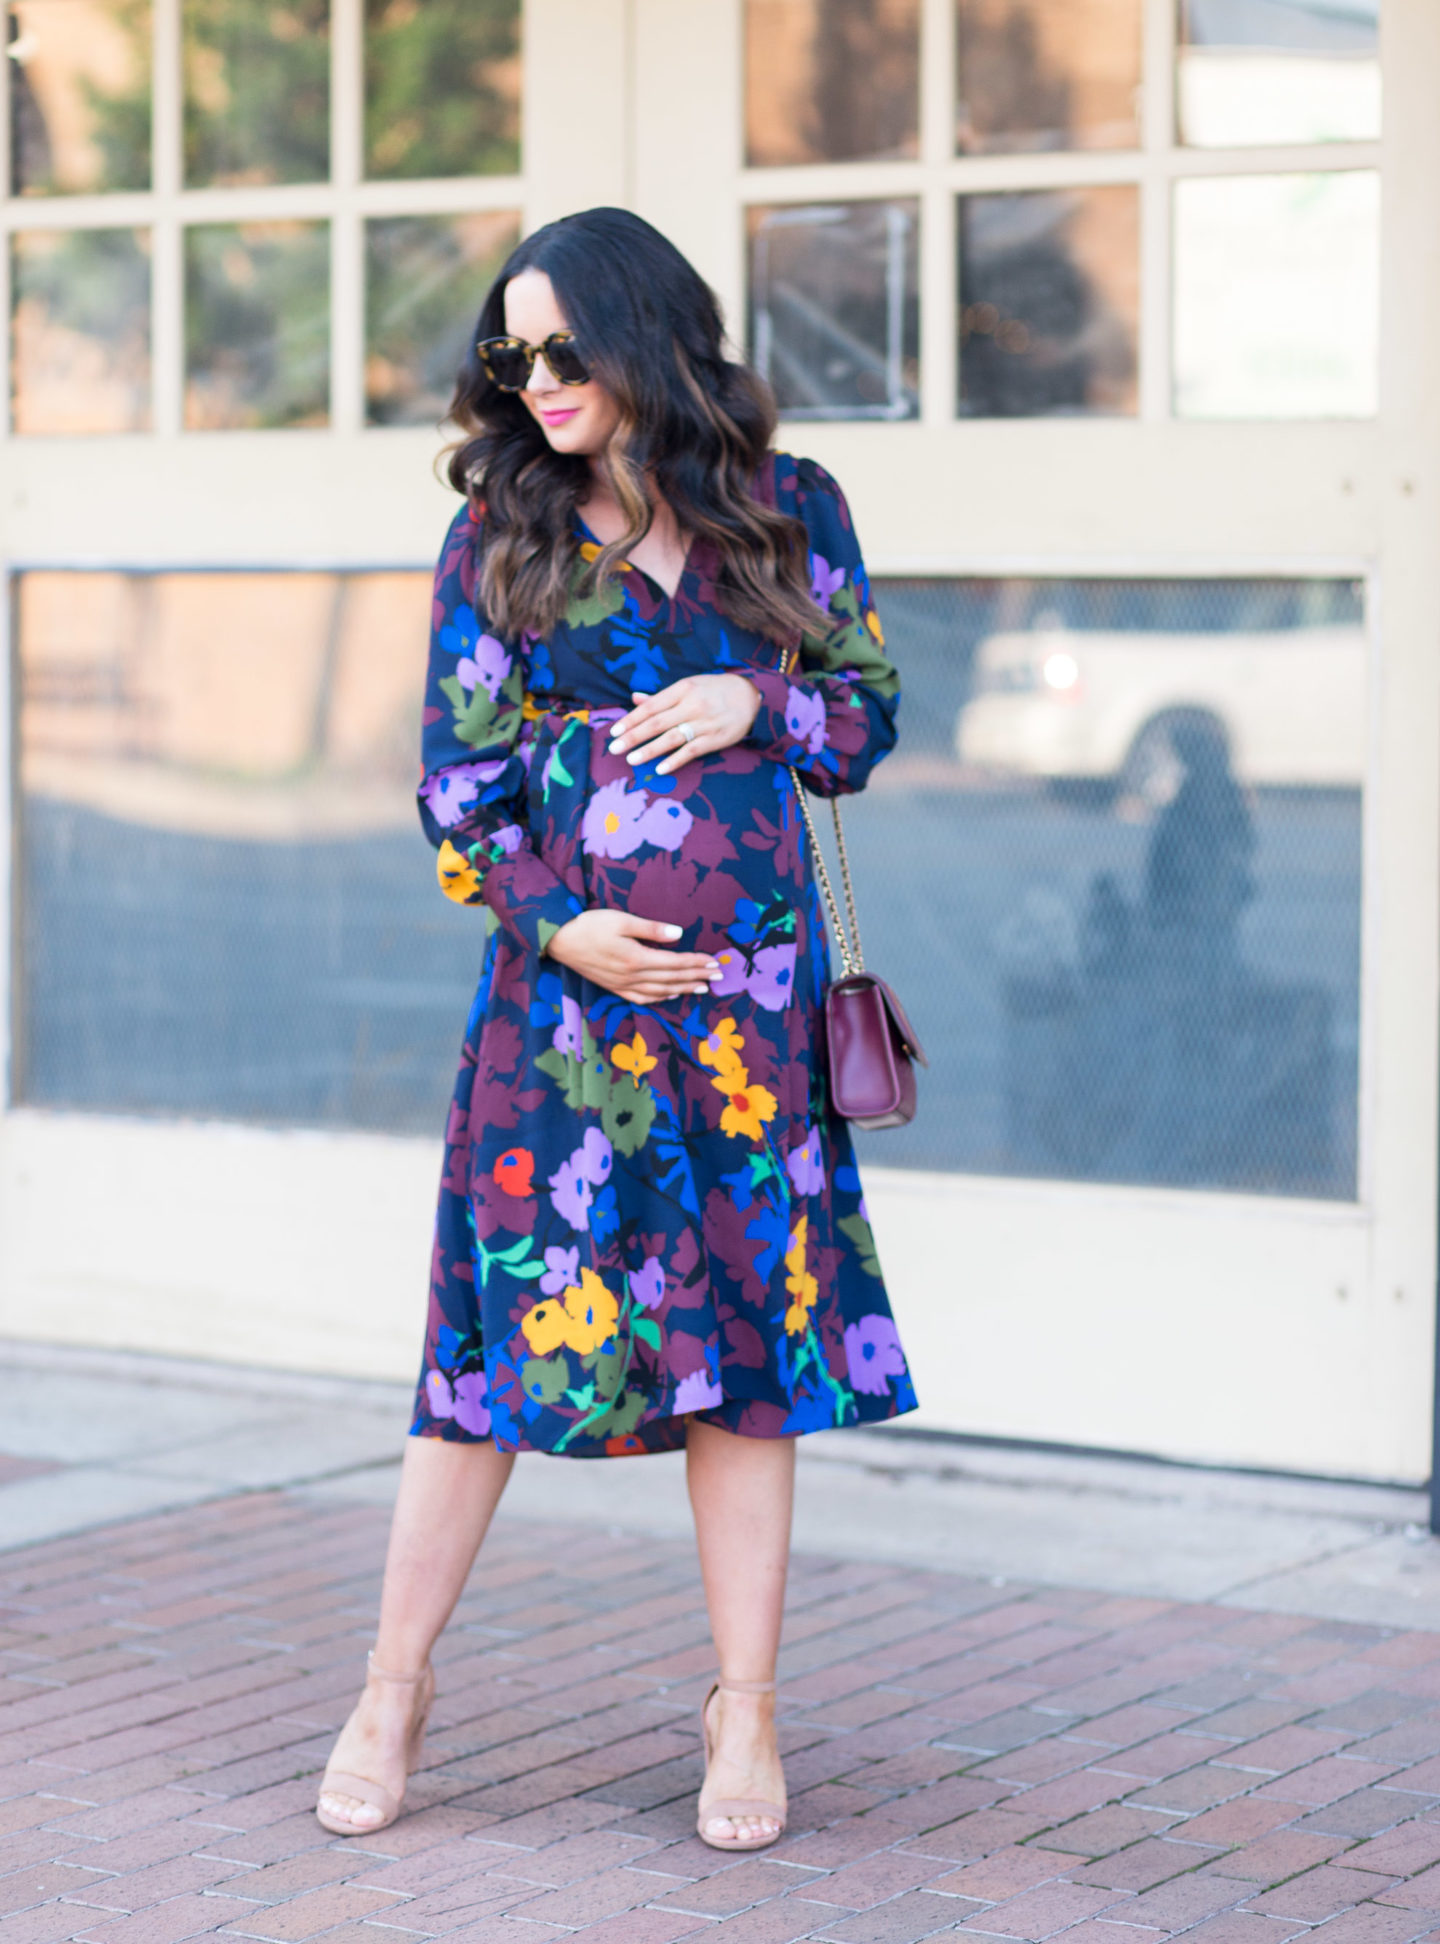 Fall Sister Style Staples: Wrap Dresses + Colorful Blazers - The Double ...